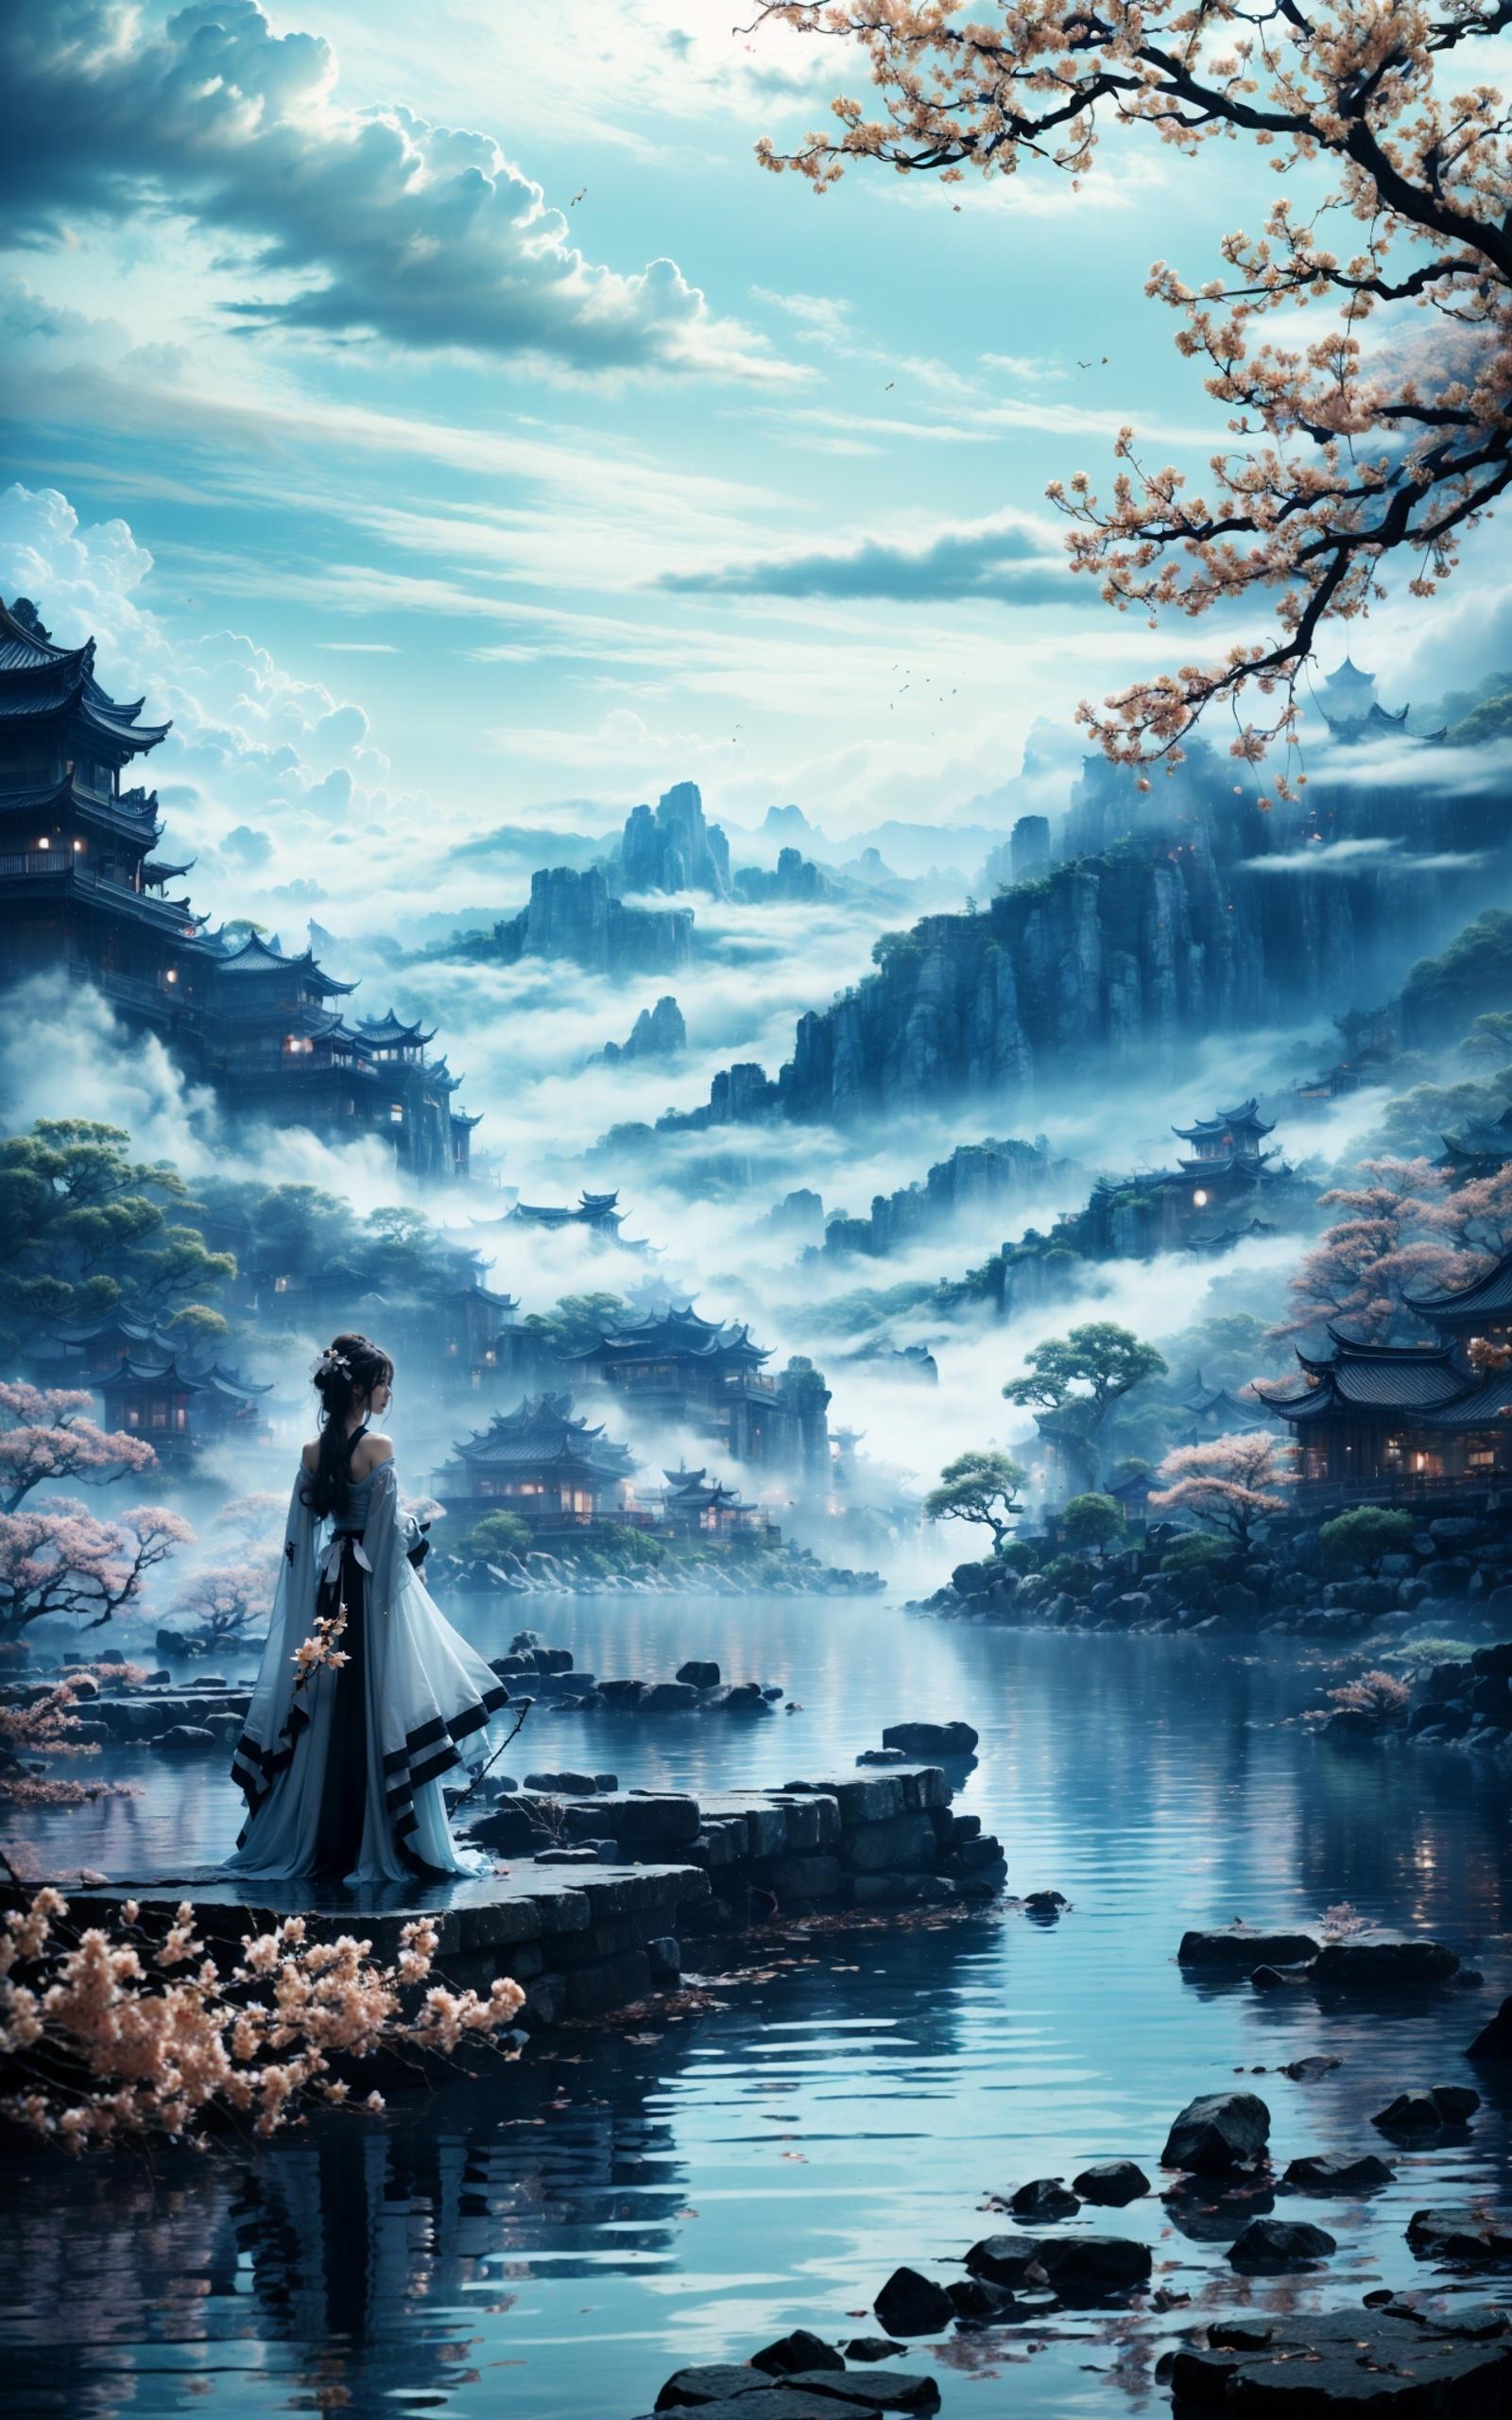 A woman in a white dress standing by a river in front of a mountainous background with Asian-inspired architecture, including pagodas and a castle. The scene is set in the evening with a flowery tree and a bird flying nearby.